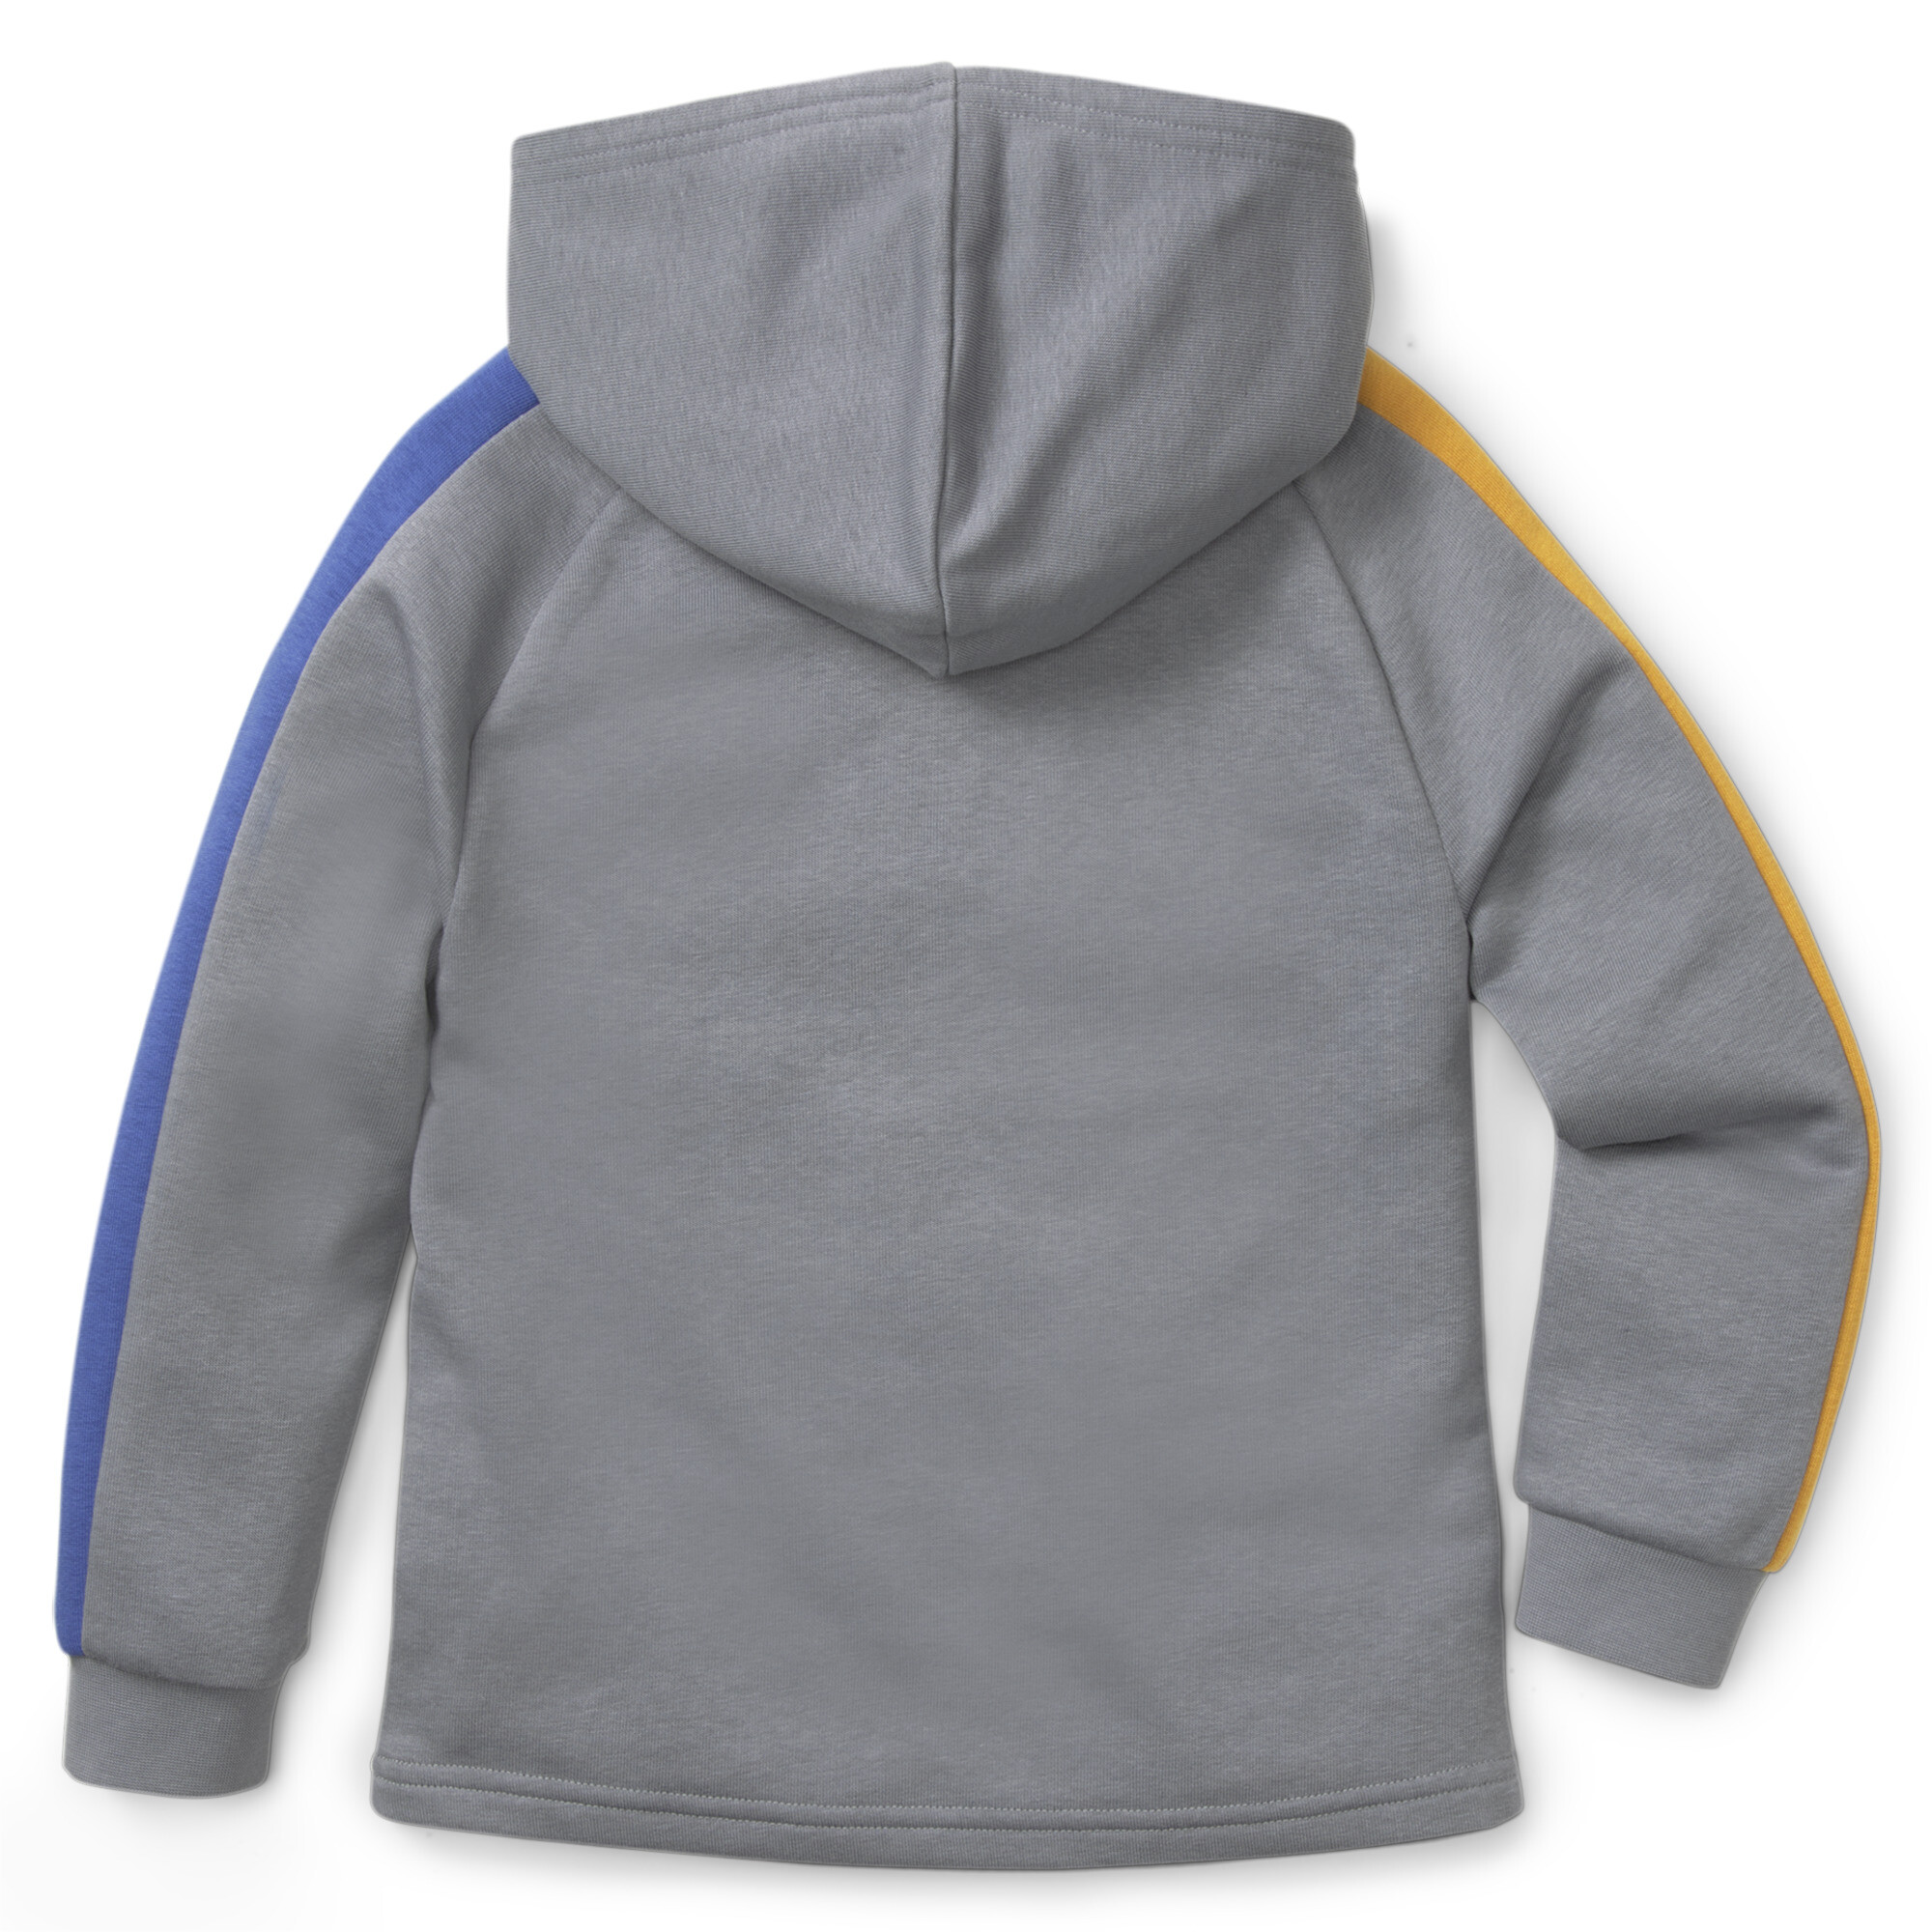 PUMA MATES T7 Hoodie Kids In Gray, Size 2-3 Months